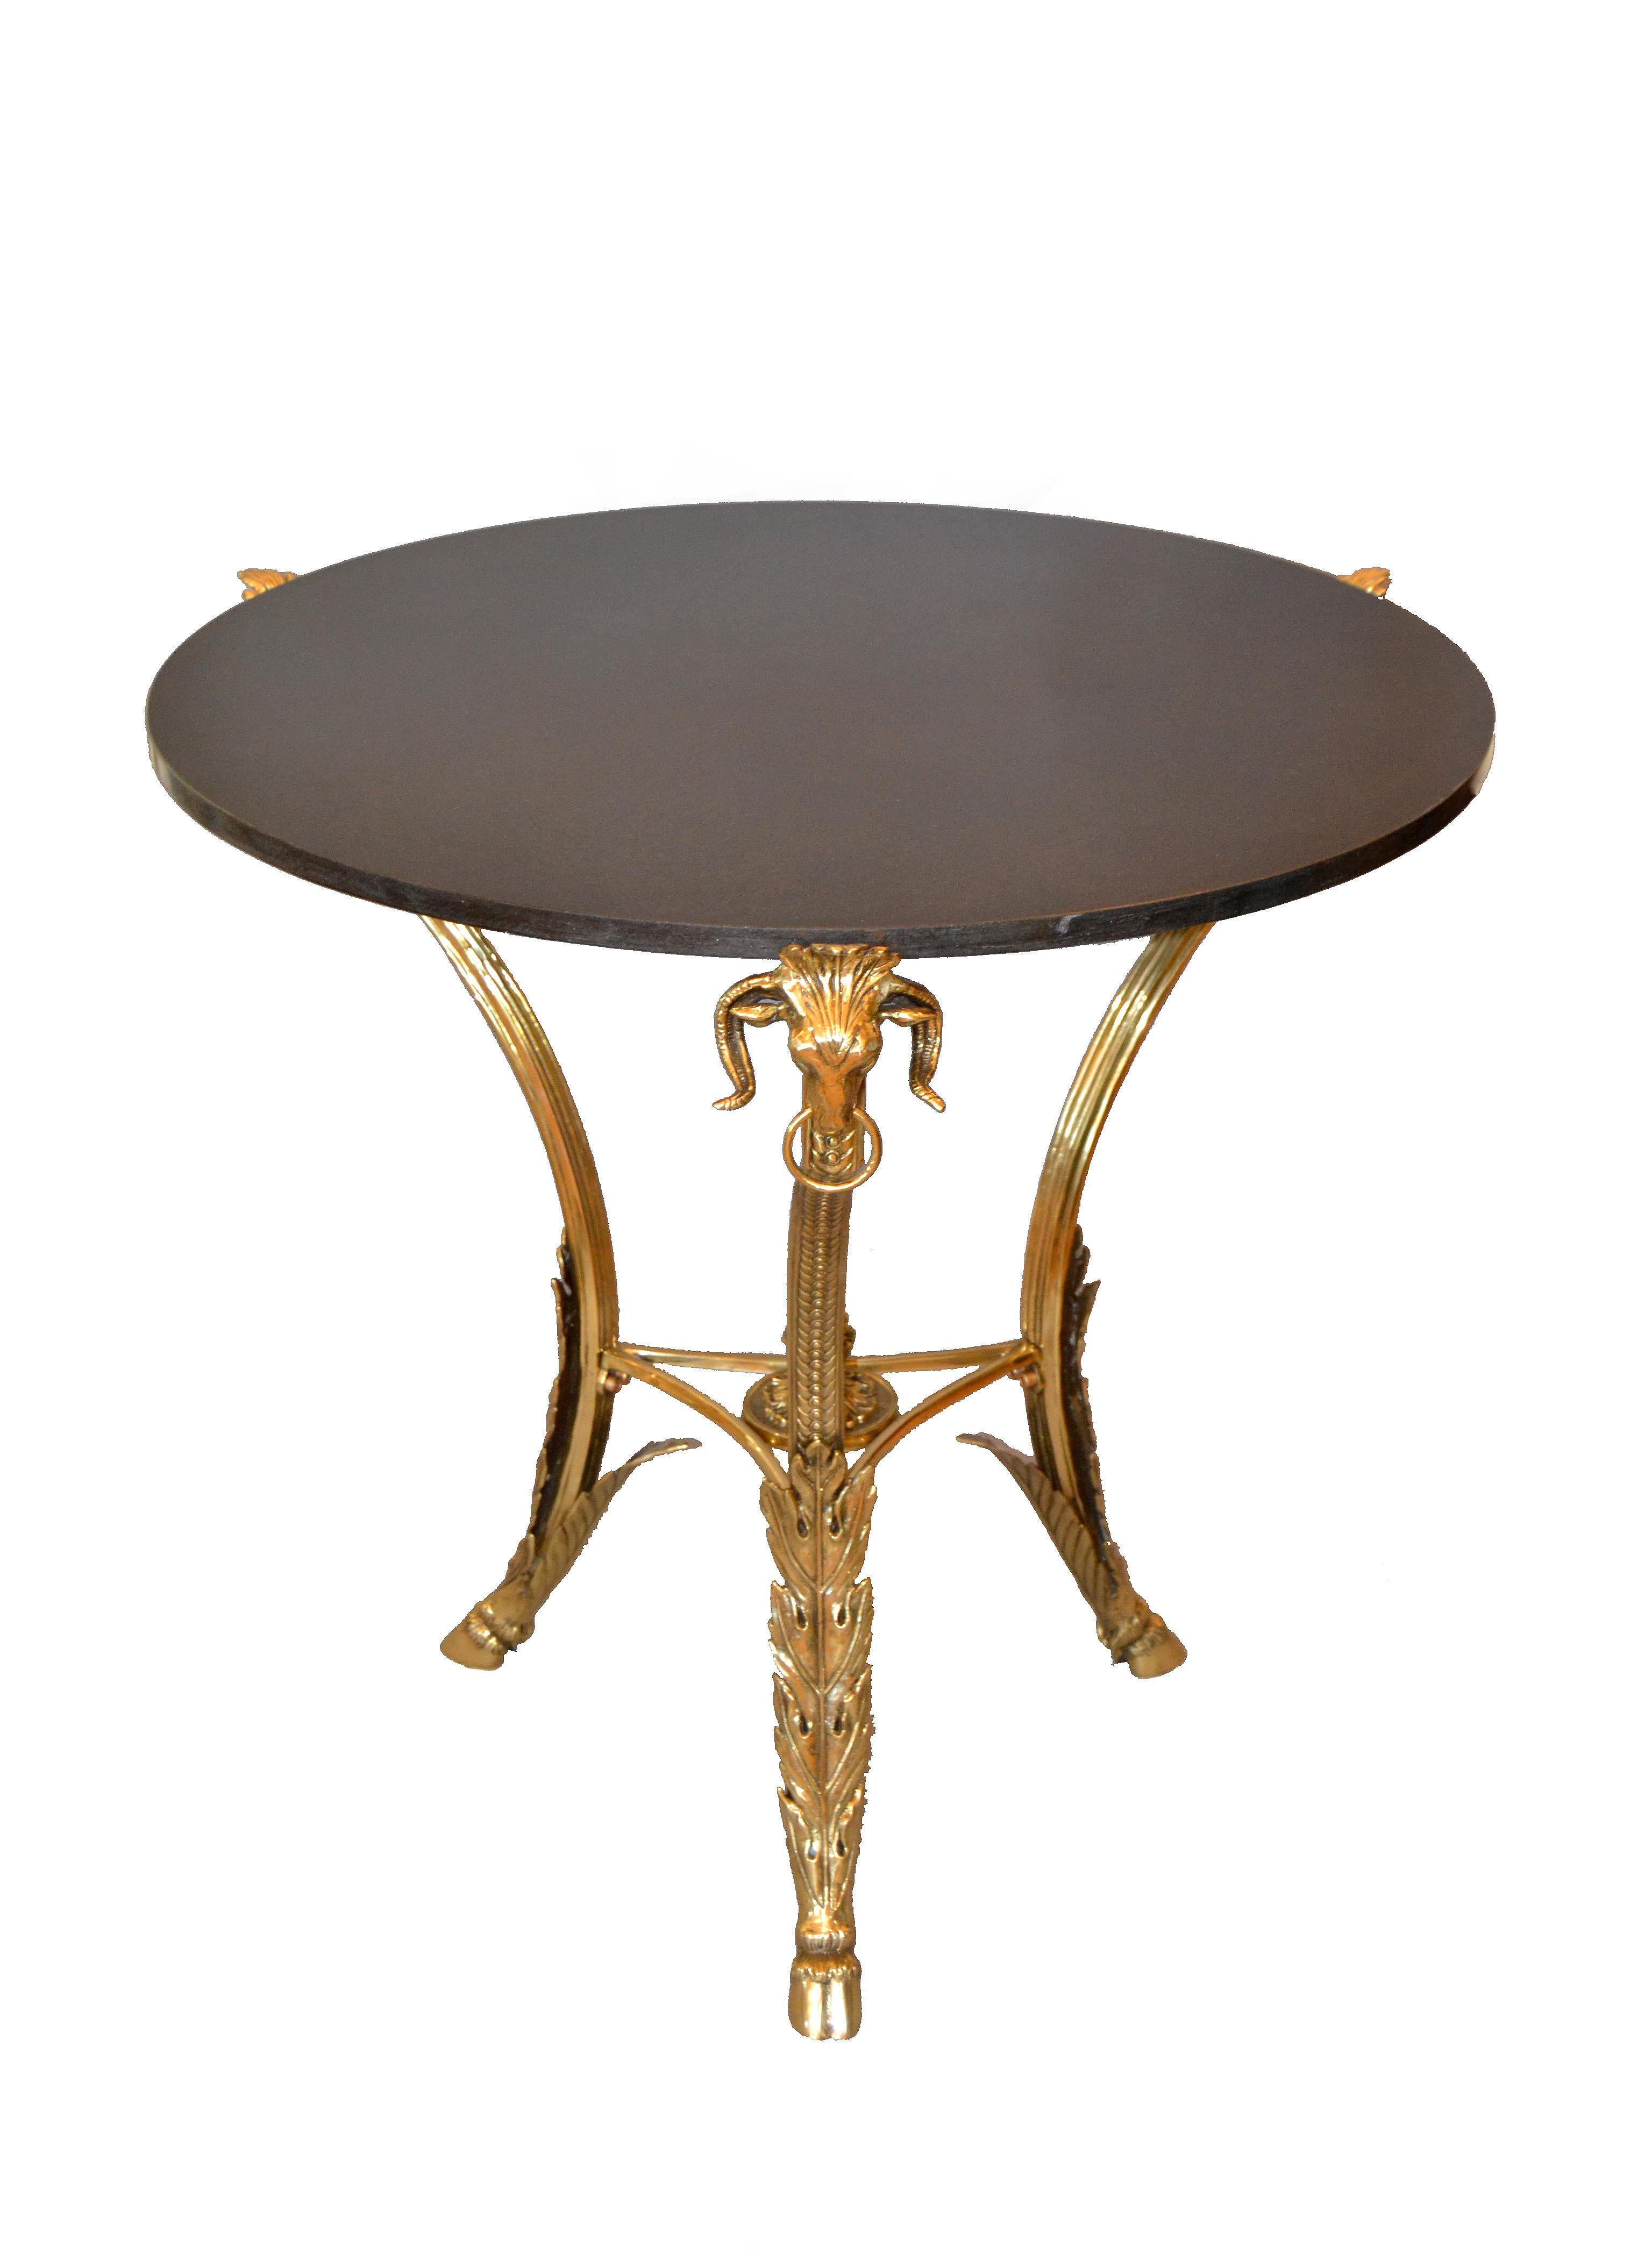 French Round Bronze Gueridon Style Table Rams Heads and Feet with Granite Top For Sale 5